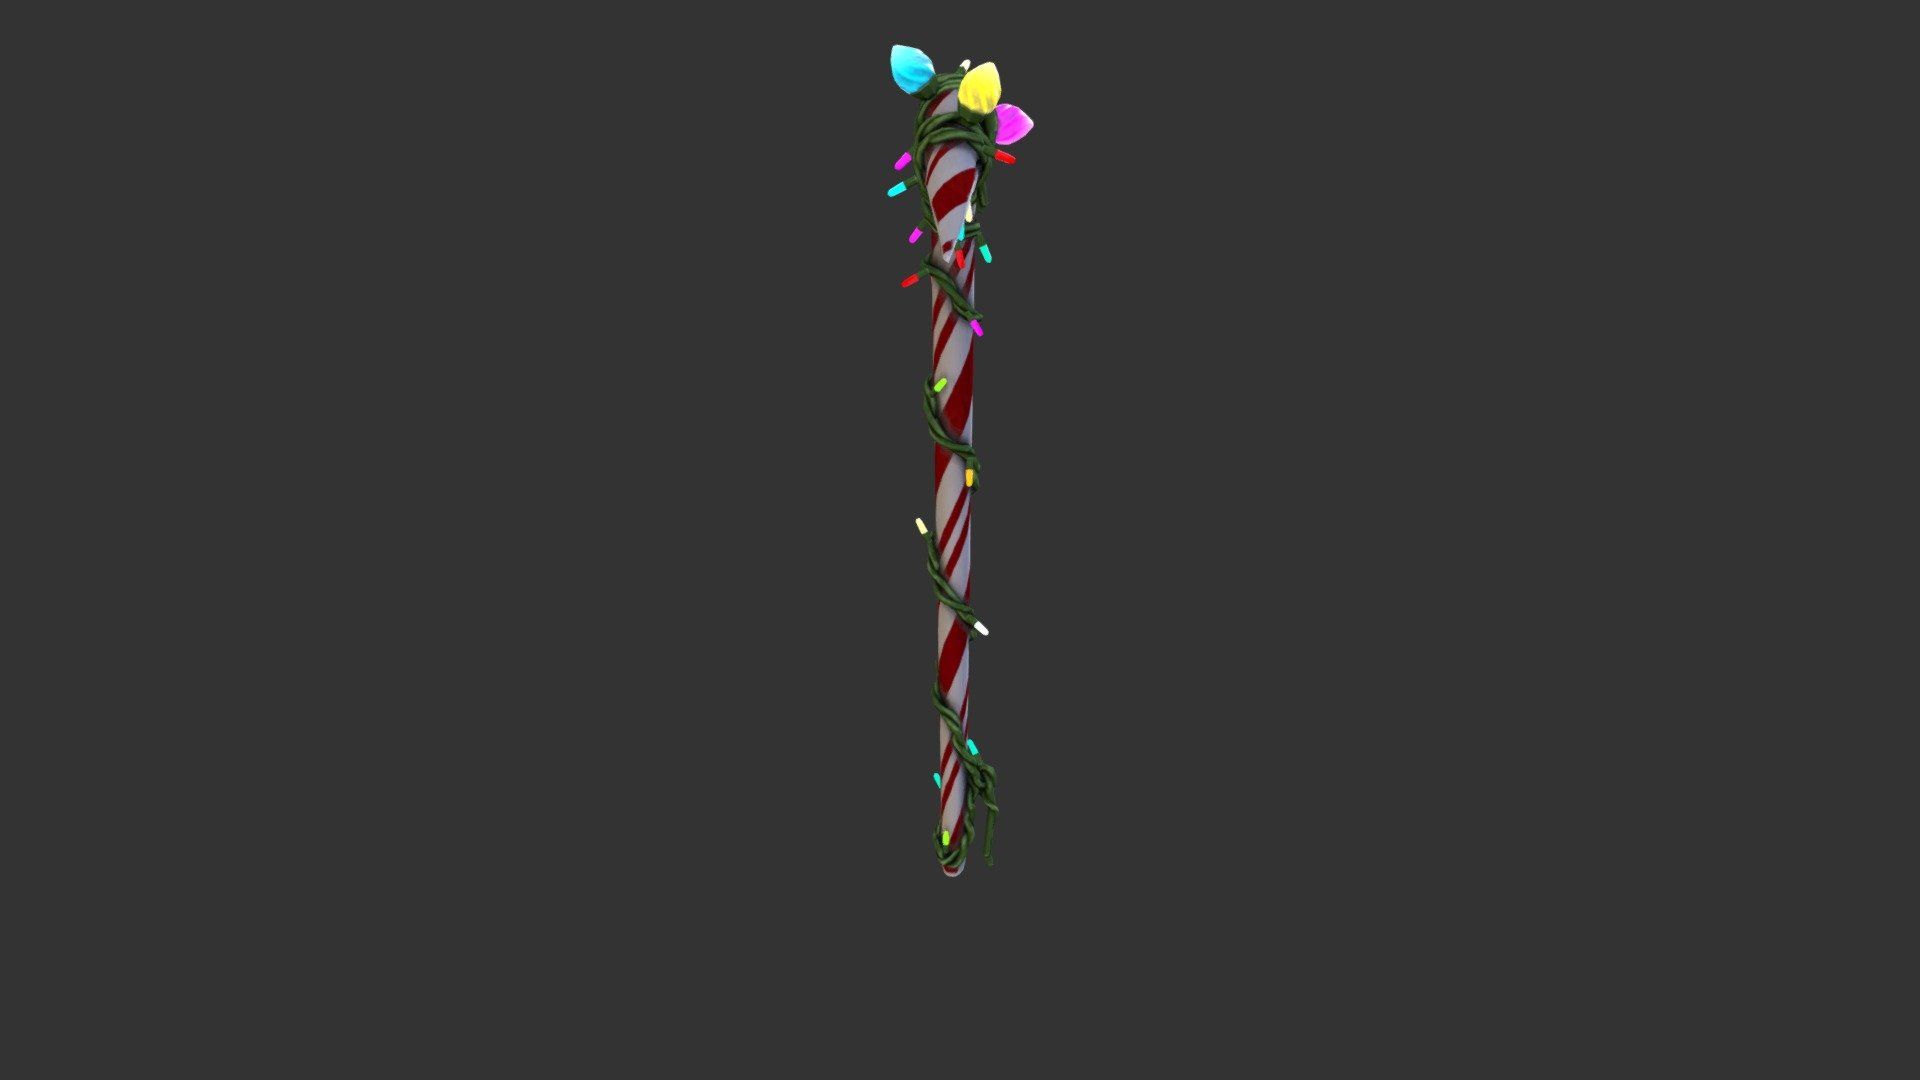 Candy Axe Harvesting Tool model by Fortnite Skins [6f3241f]